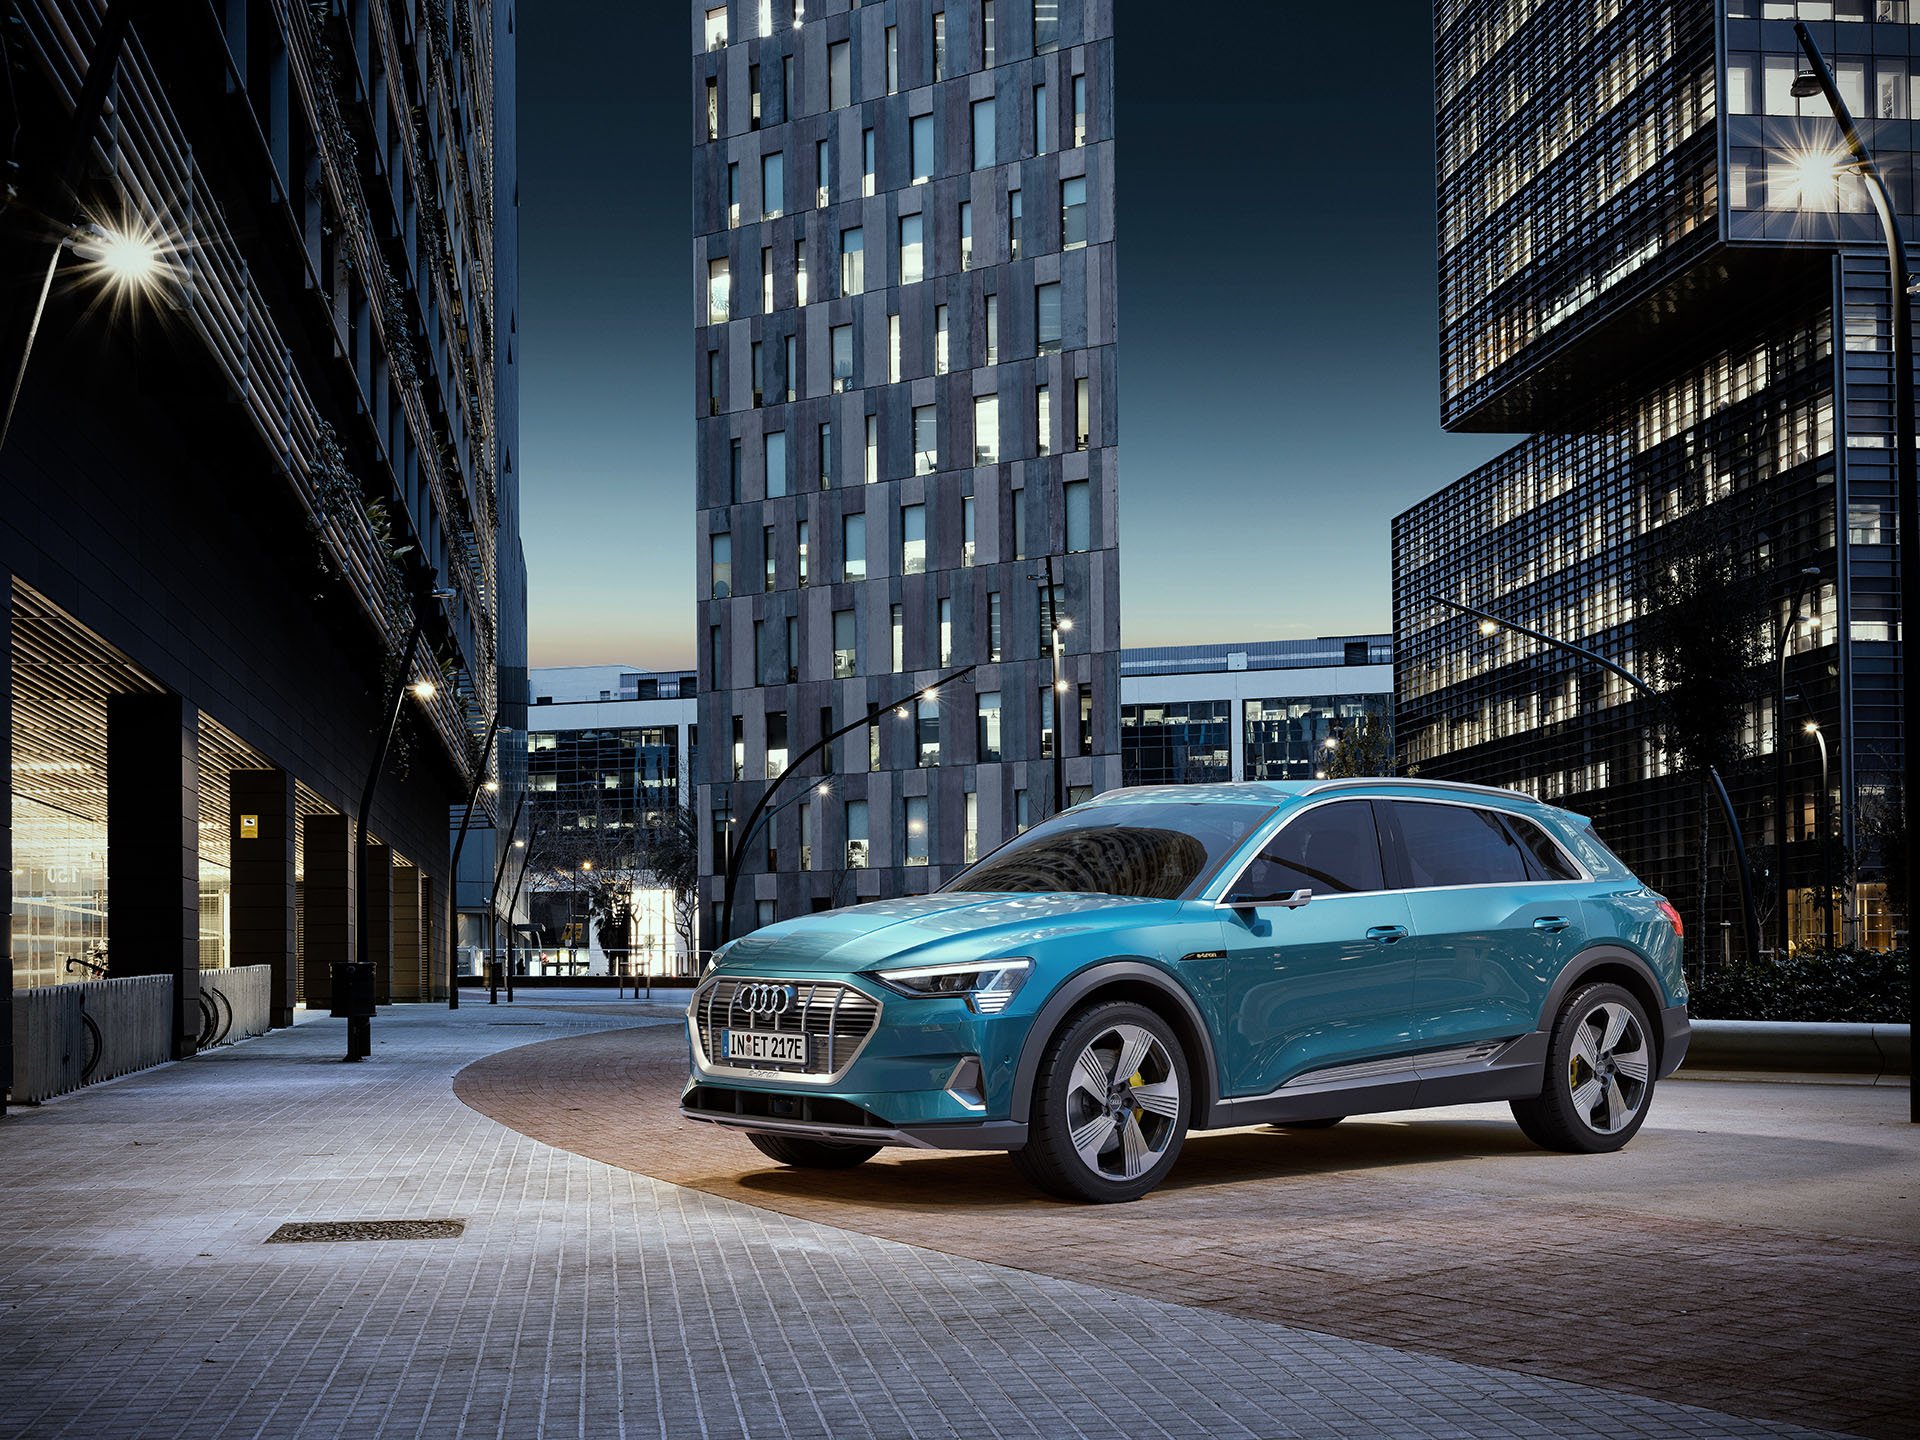 CGI images for AUDI e-tron, first 100% AUDI electric car.